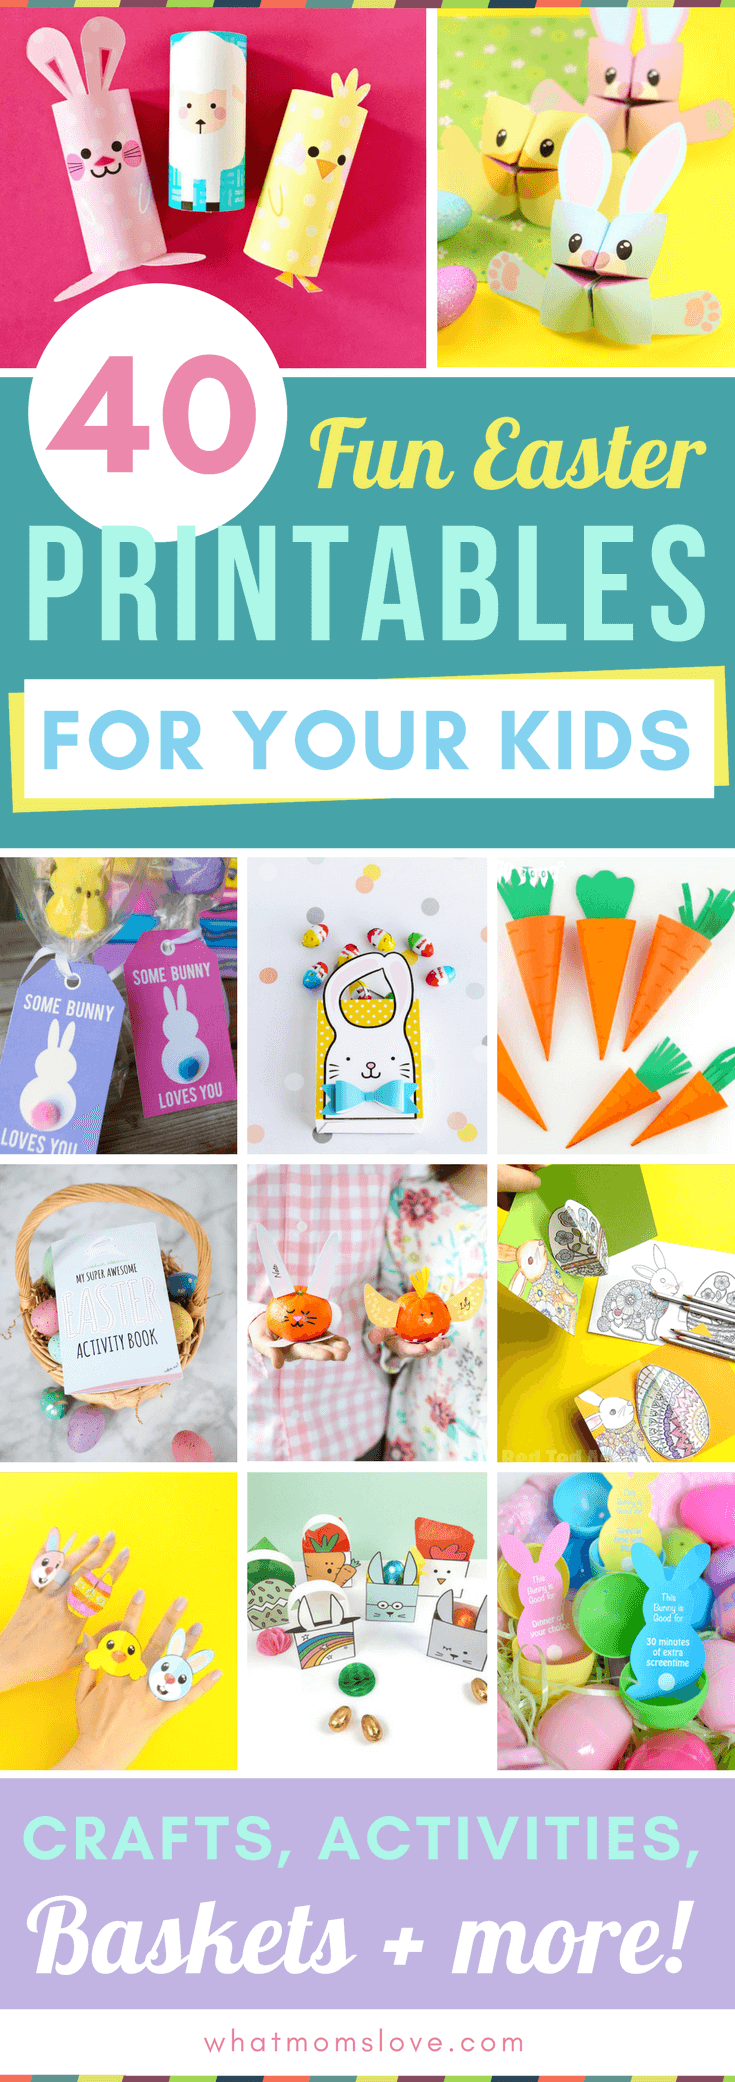 40 Fun Easter Printables For Kids Crafts Activities Egg Hunts More What Moms Love